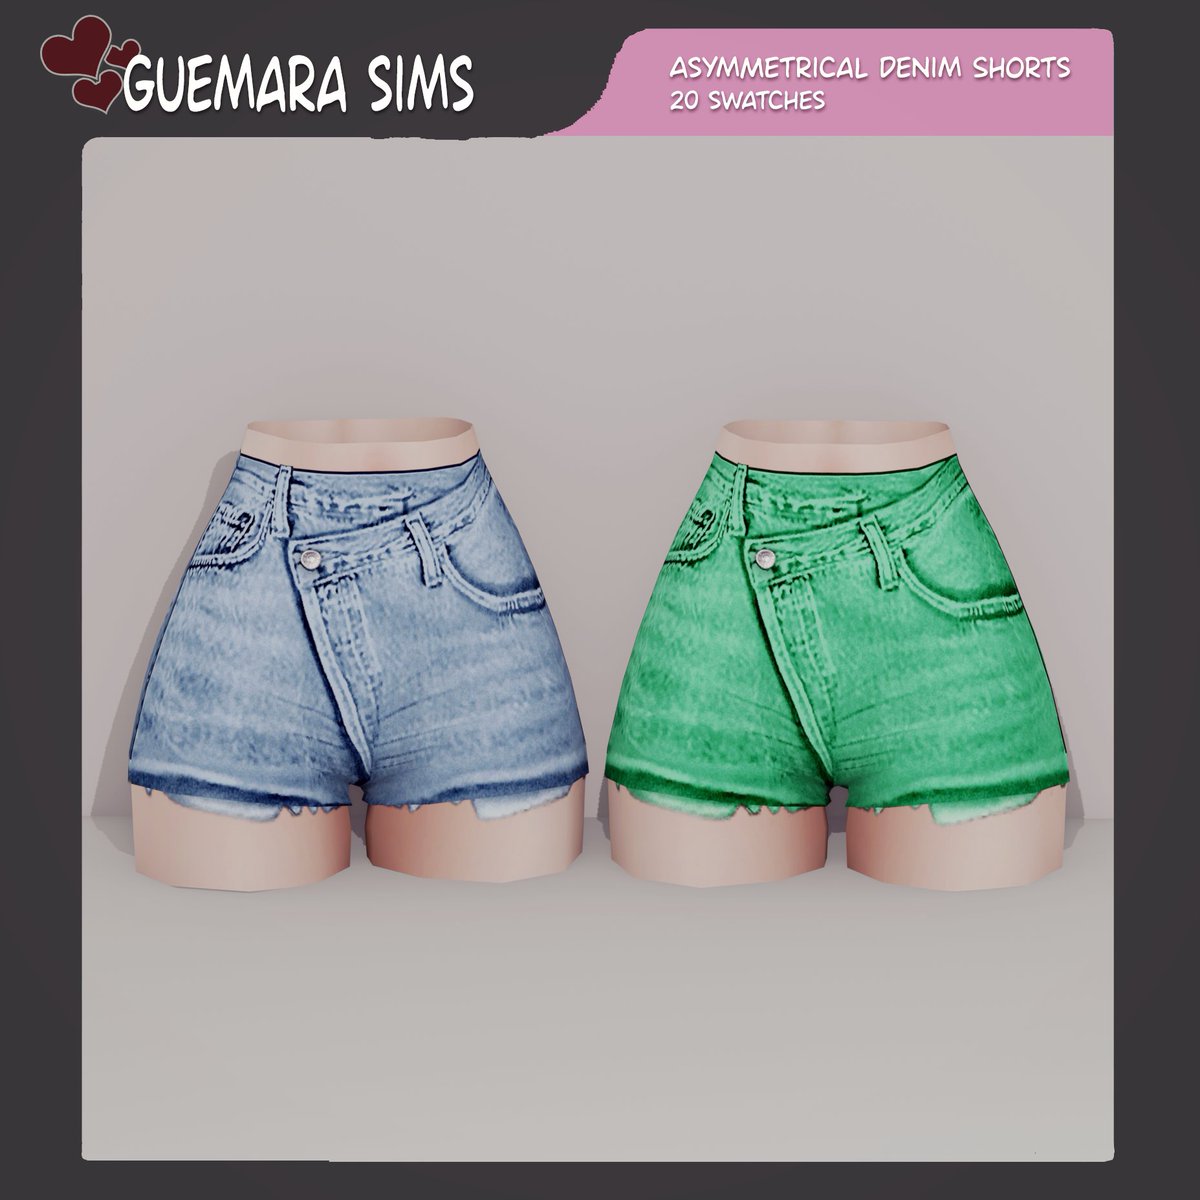 Elevate your Sims' style with my Asymmetrical Denim Shorts!
More info: patreon.com/posts/84209729

#Sims4 #TheSims4 #thesims4cc #sims4ccfinds #Sims4Cc #ShowUsYourSims #sims4customcontent #Sims4Clothing